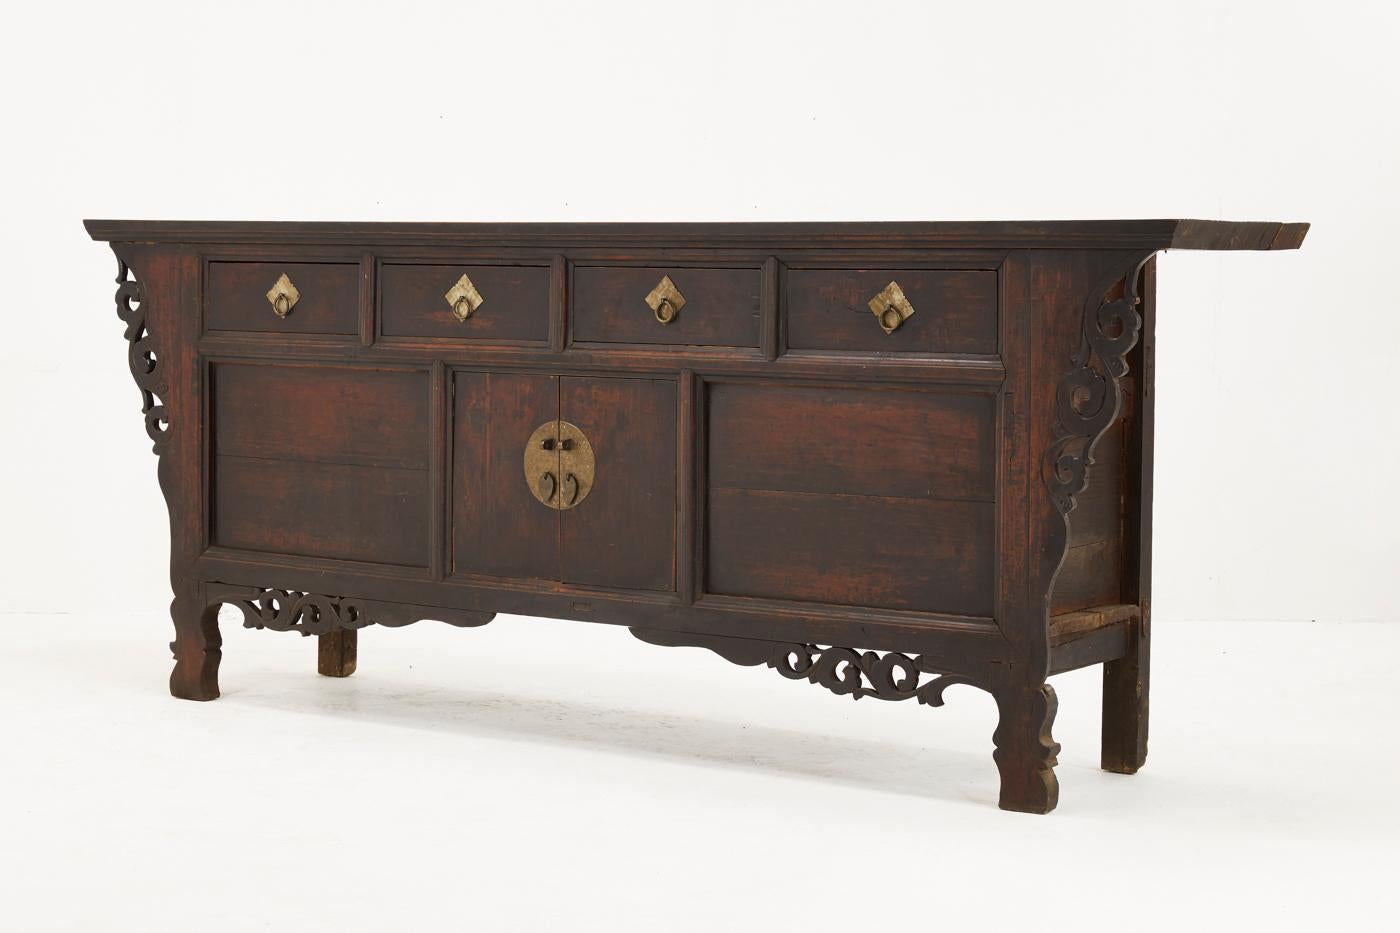 Superb example, 19th century Chinese sideboard in solid elm, retaining a wonderful untouched patina with carved decoration, brass handles and metalwork.